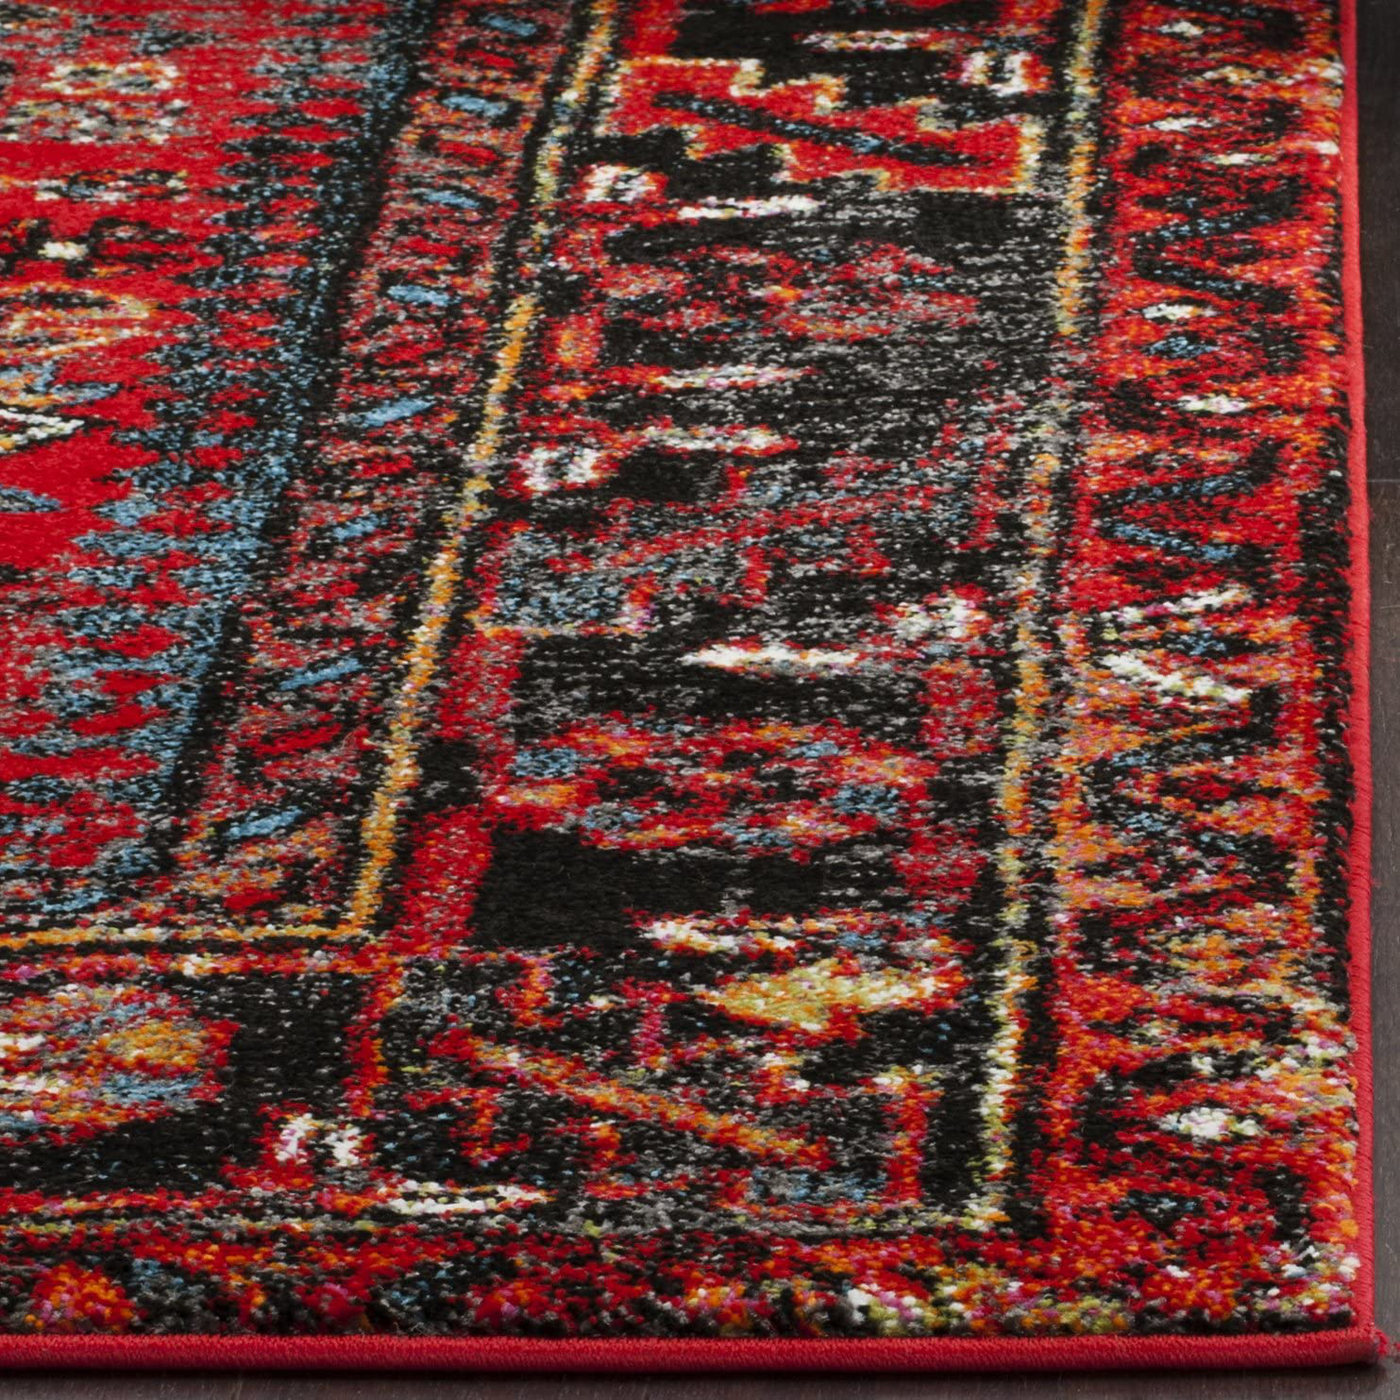 Safavieh Vintage Hamadan Collection VTH211A Oriental Traditional Persian Non-Shedding Stain Resistant Living Room Bedroom Runner, 2'3" x 16' , Red / Multi